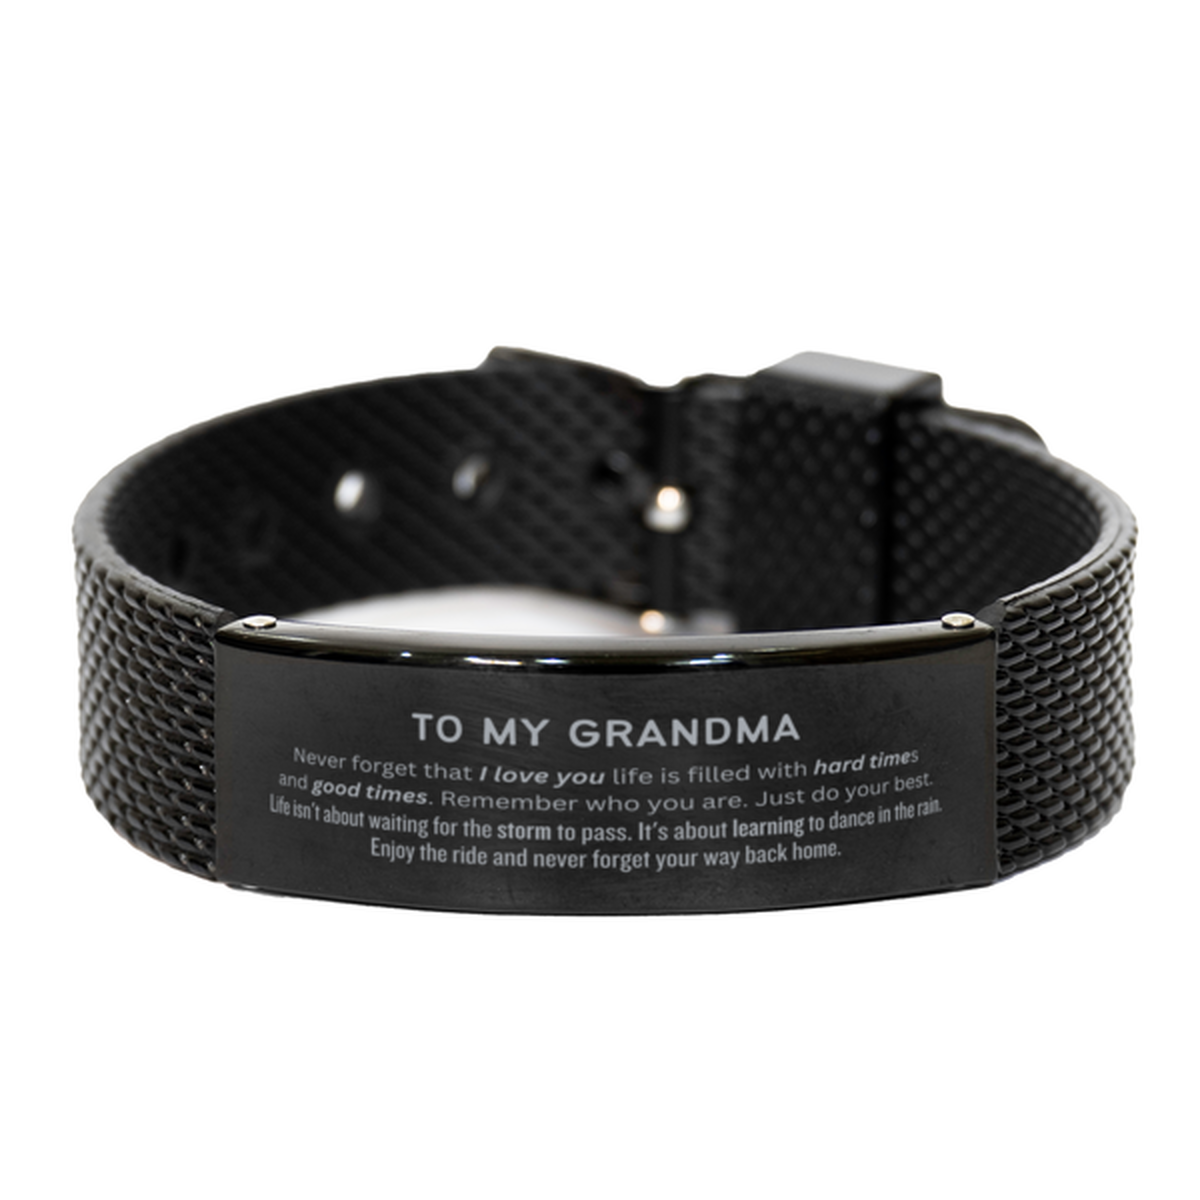 Christmas Grandma Black Shark Mesh Bracelet Gifts, To My Grandma Birthday Thank You Gifts For Grandma, Graduation Unique Gifts For Grandma To My Grandma Never forget that I love you life is filled with hard times and good times. Remember who you are. Just